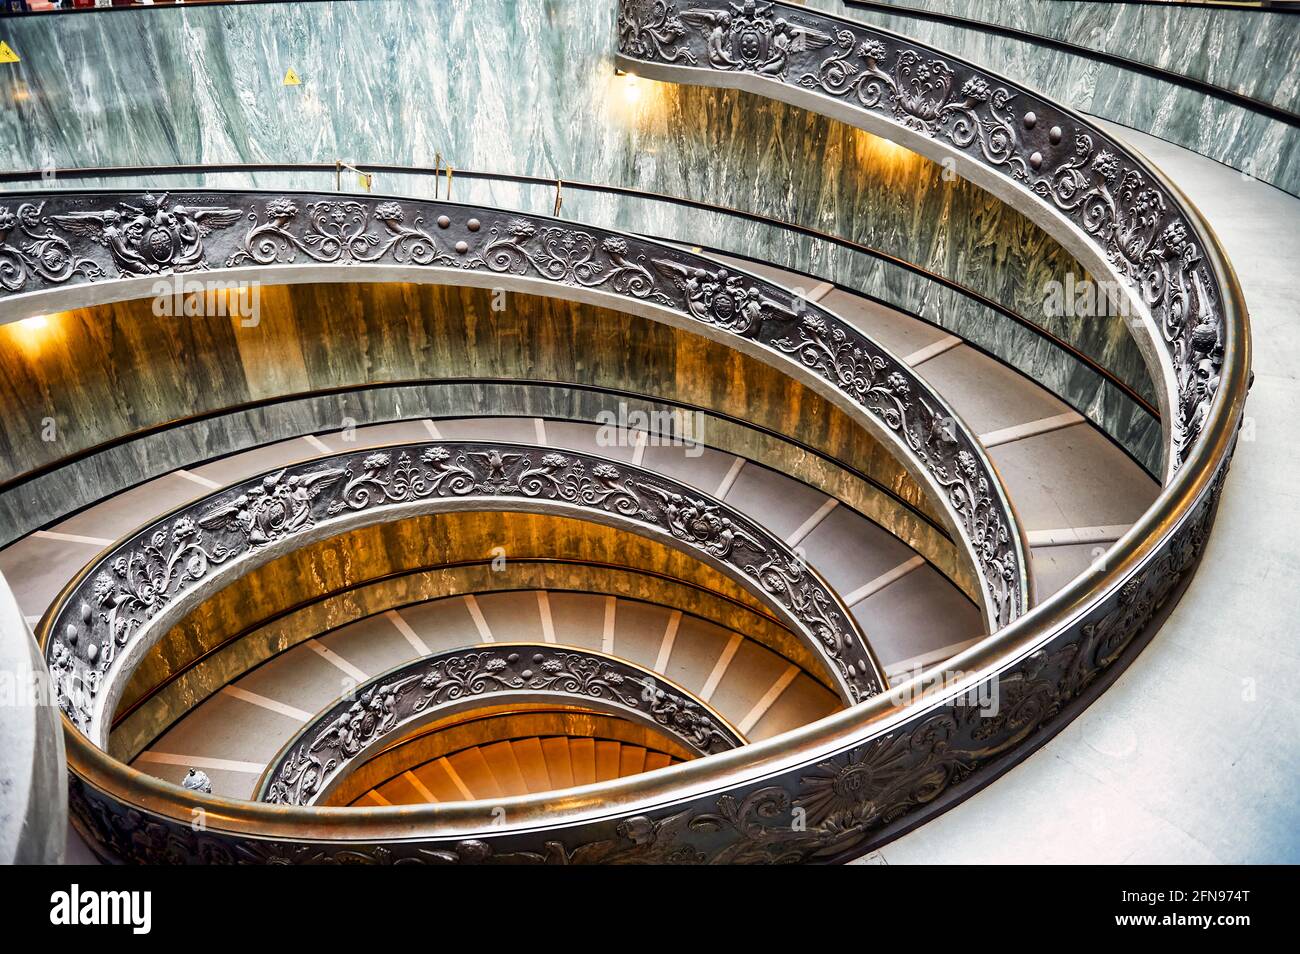 Bramante double helix staircase in Vatican Museums. Rome Italy Stock Photo